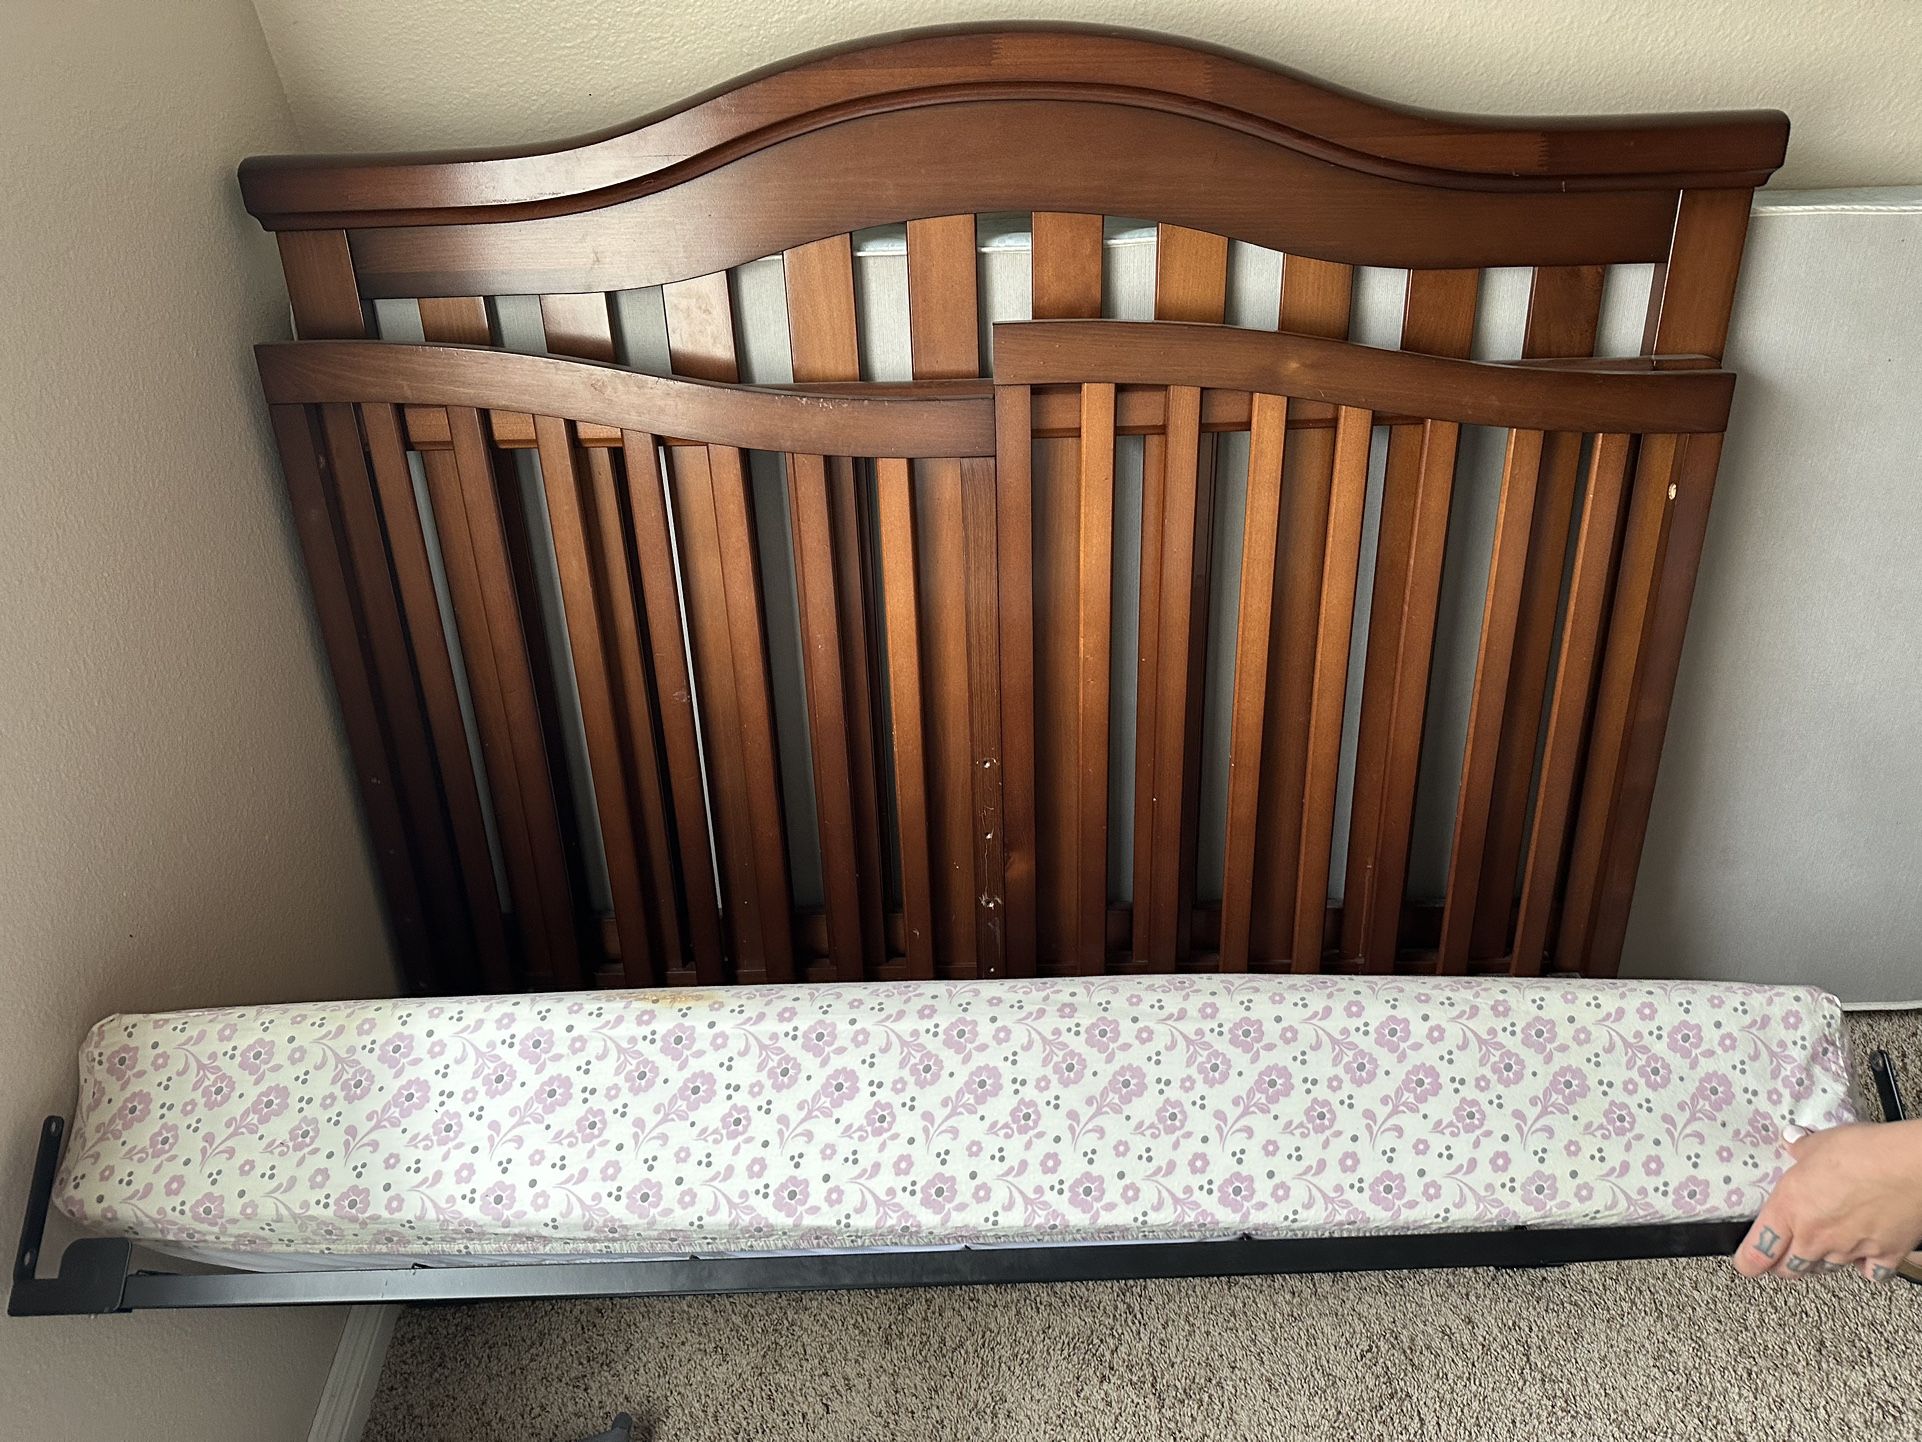 Crib With Changing Table And Bedding